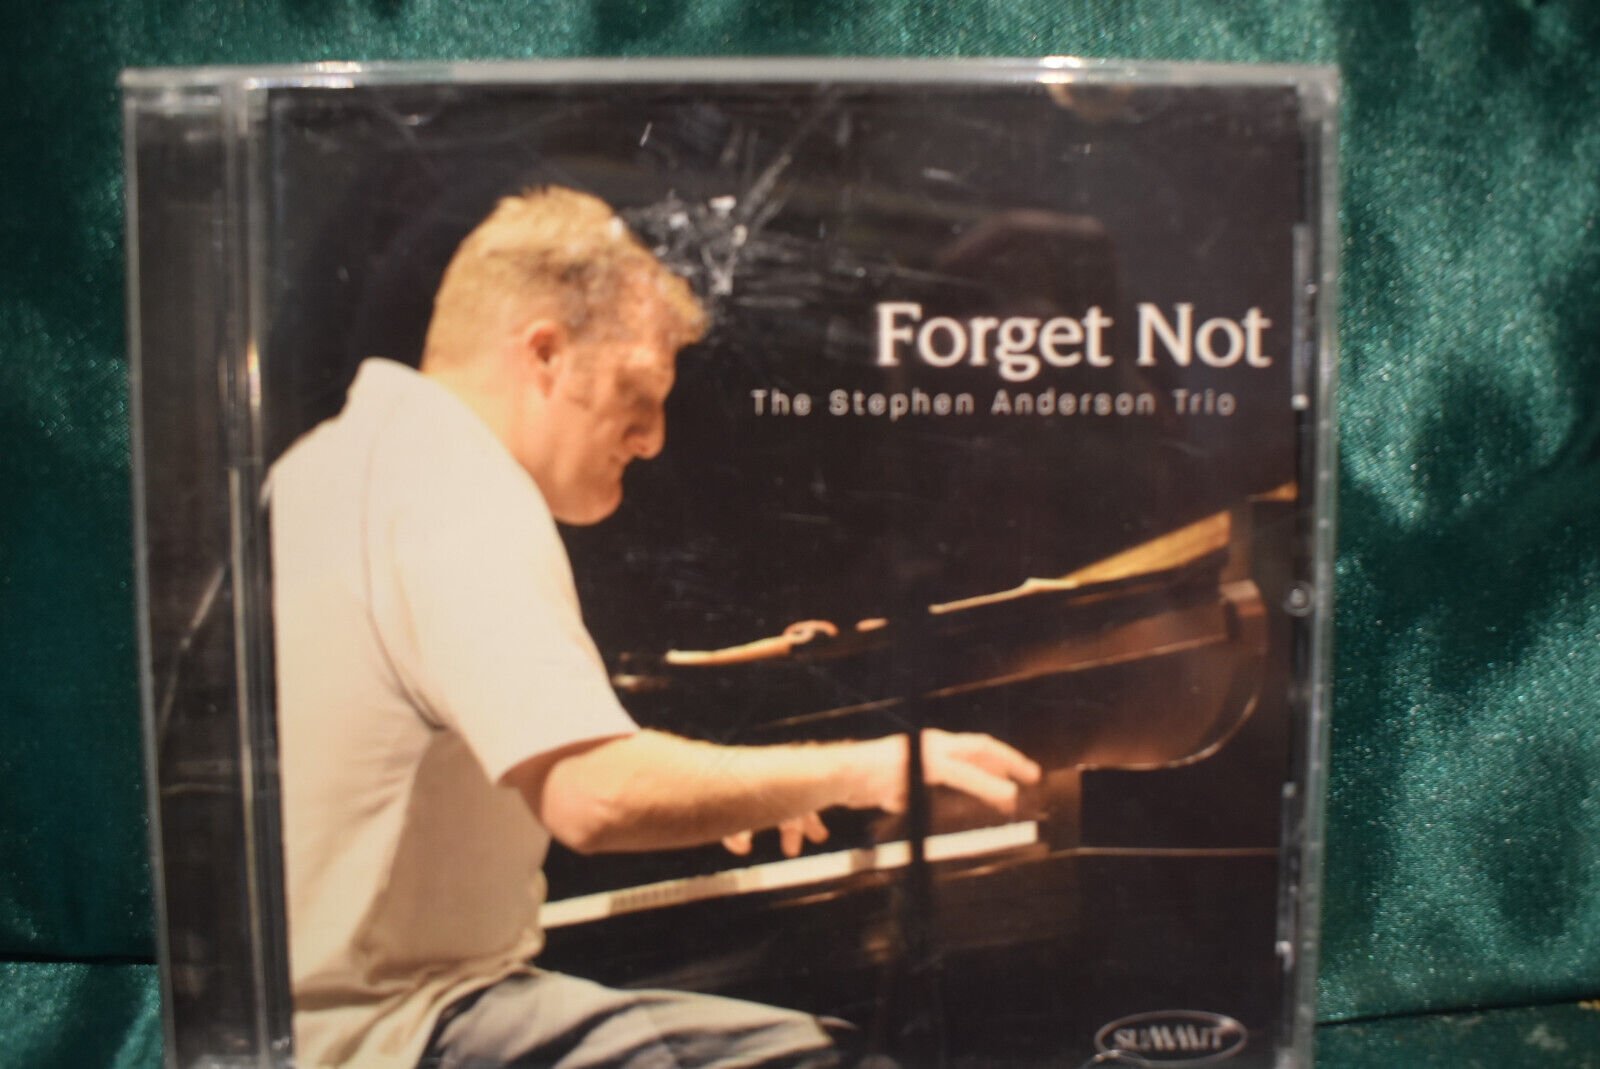 The Stephen Anderson Trio Forget Not CD